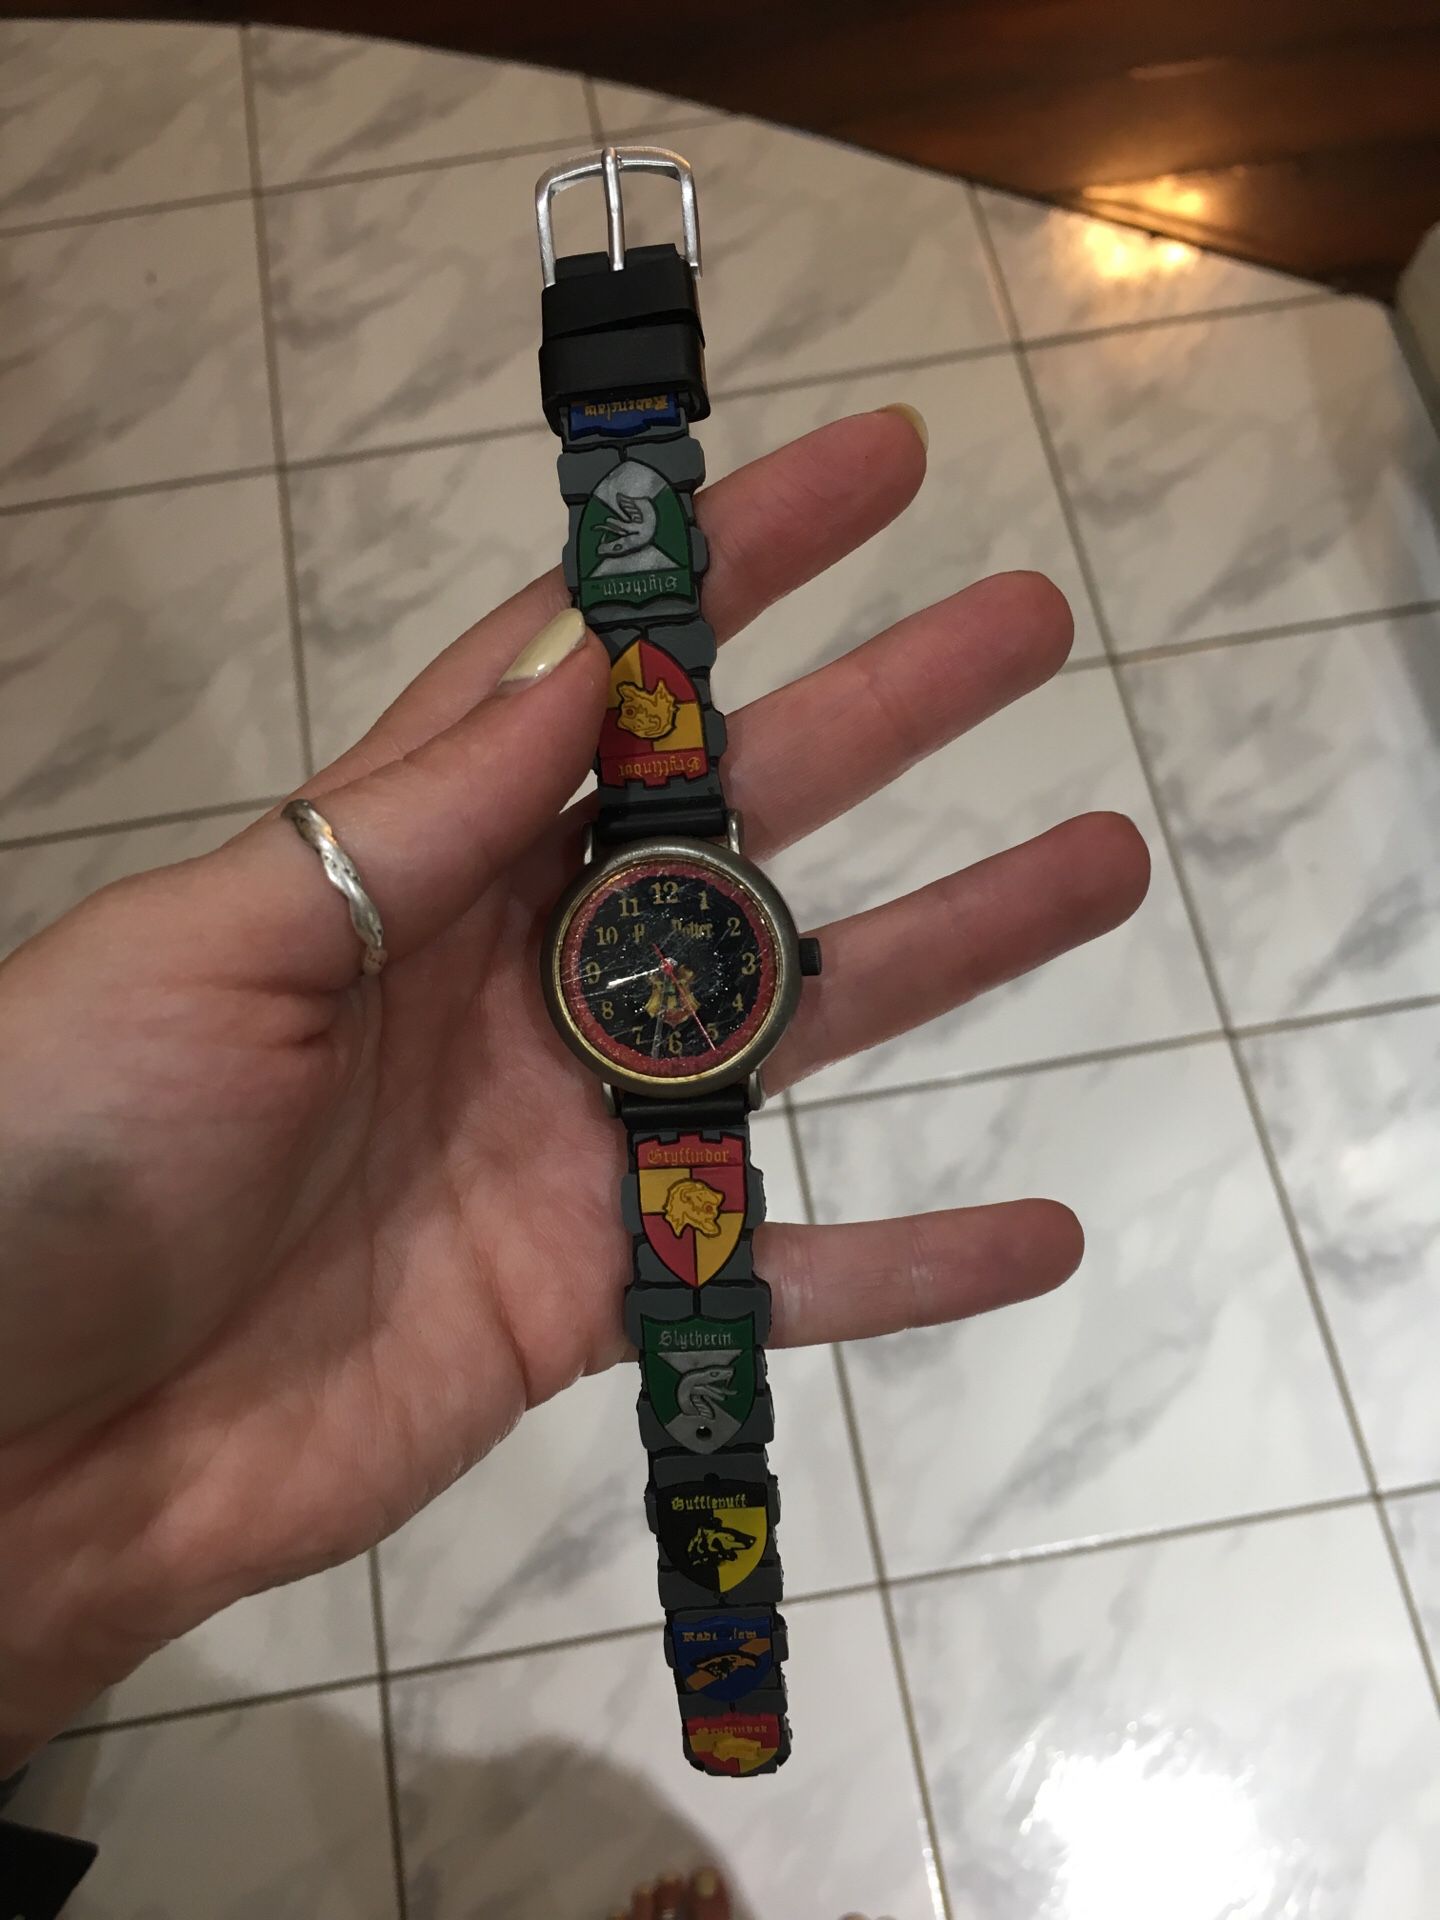 Collectible Harry Potter watch